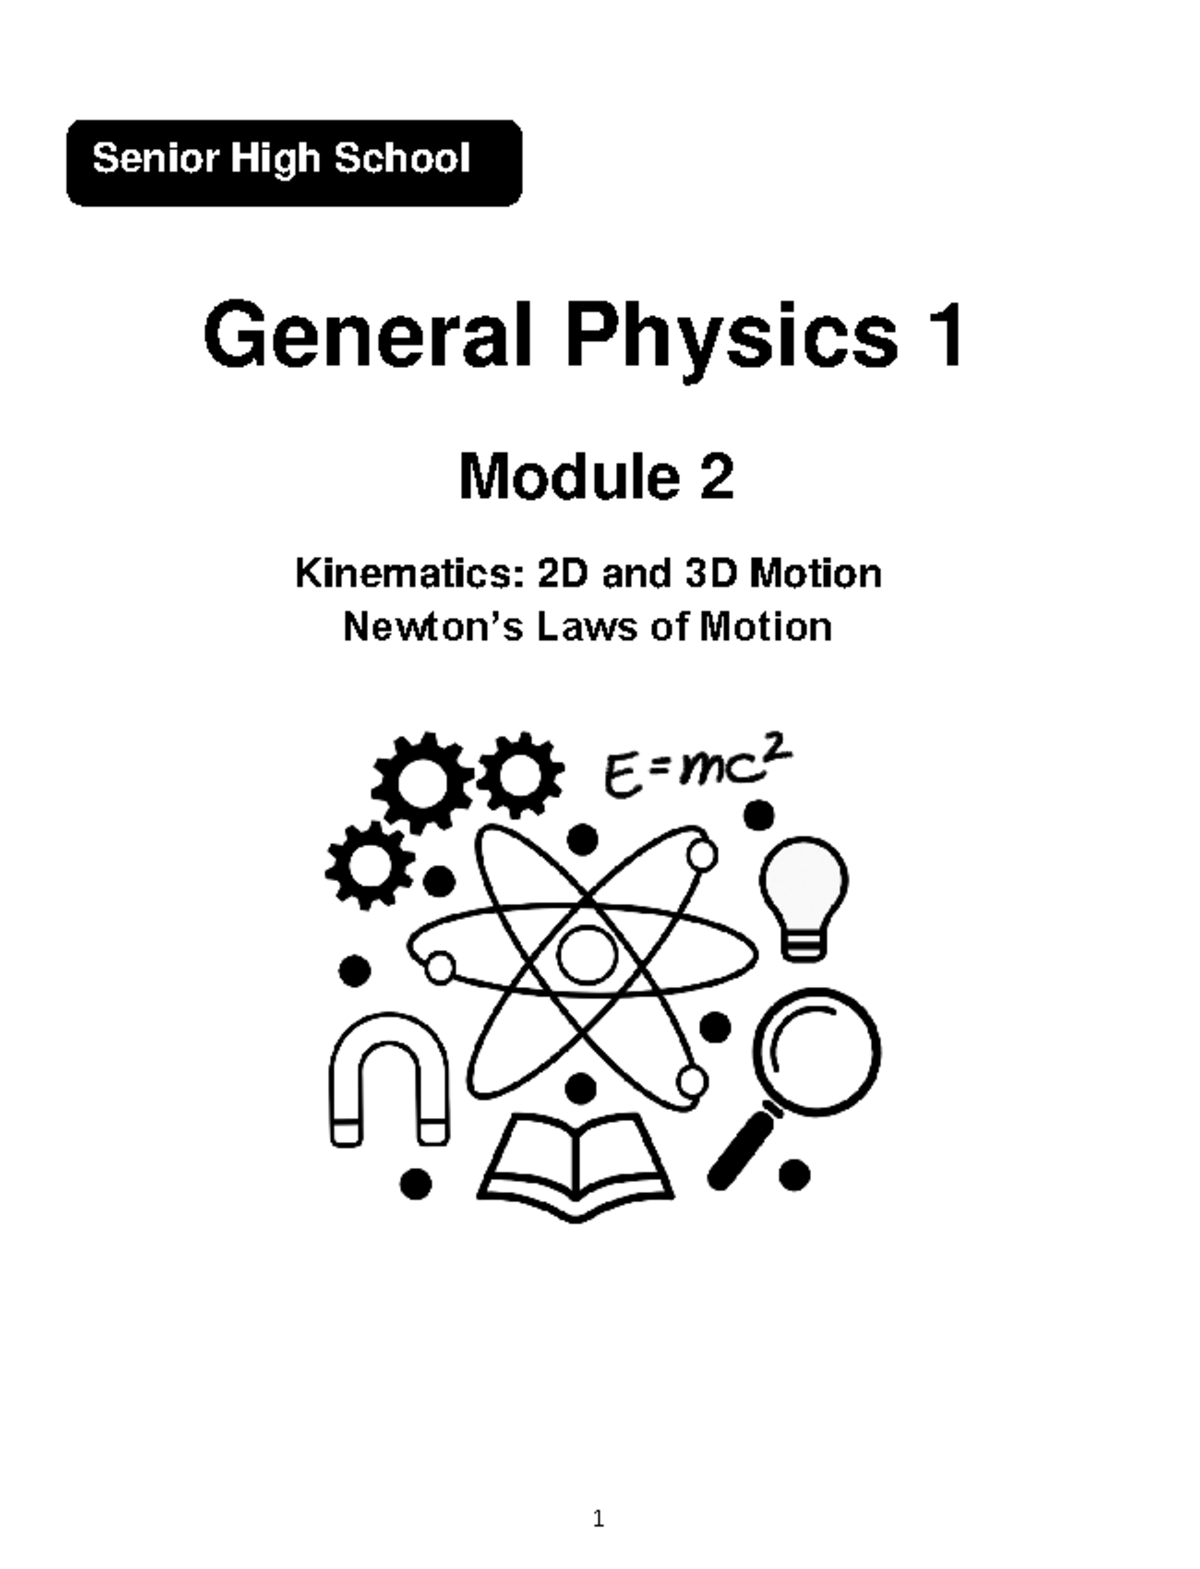 General Physics 1 Week 1 Module 2 General Physics 1 Module 2 Kinematics 2d And 3d Motion 1090